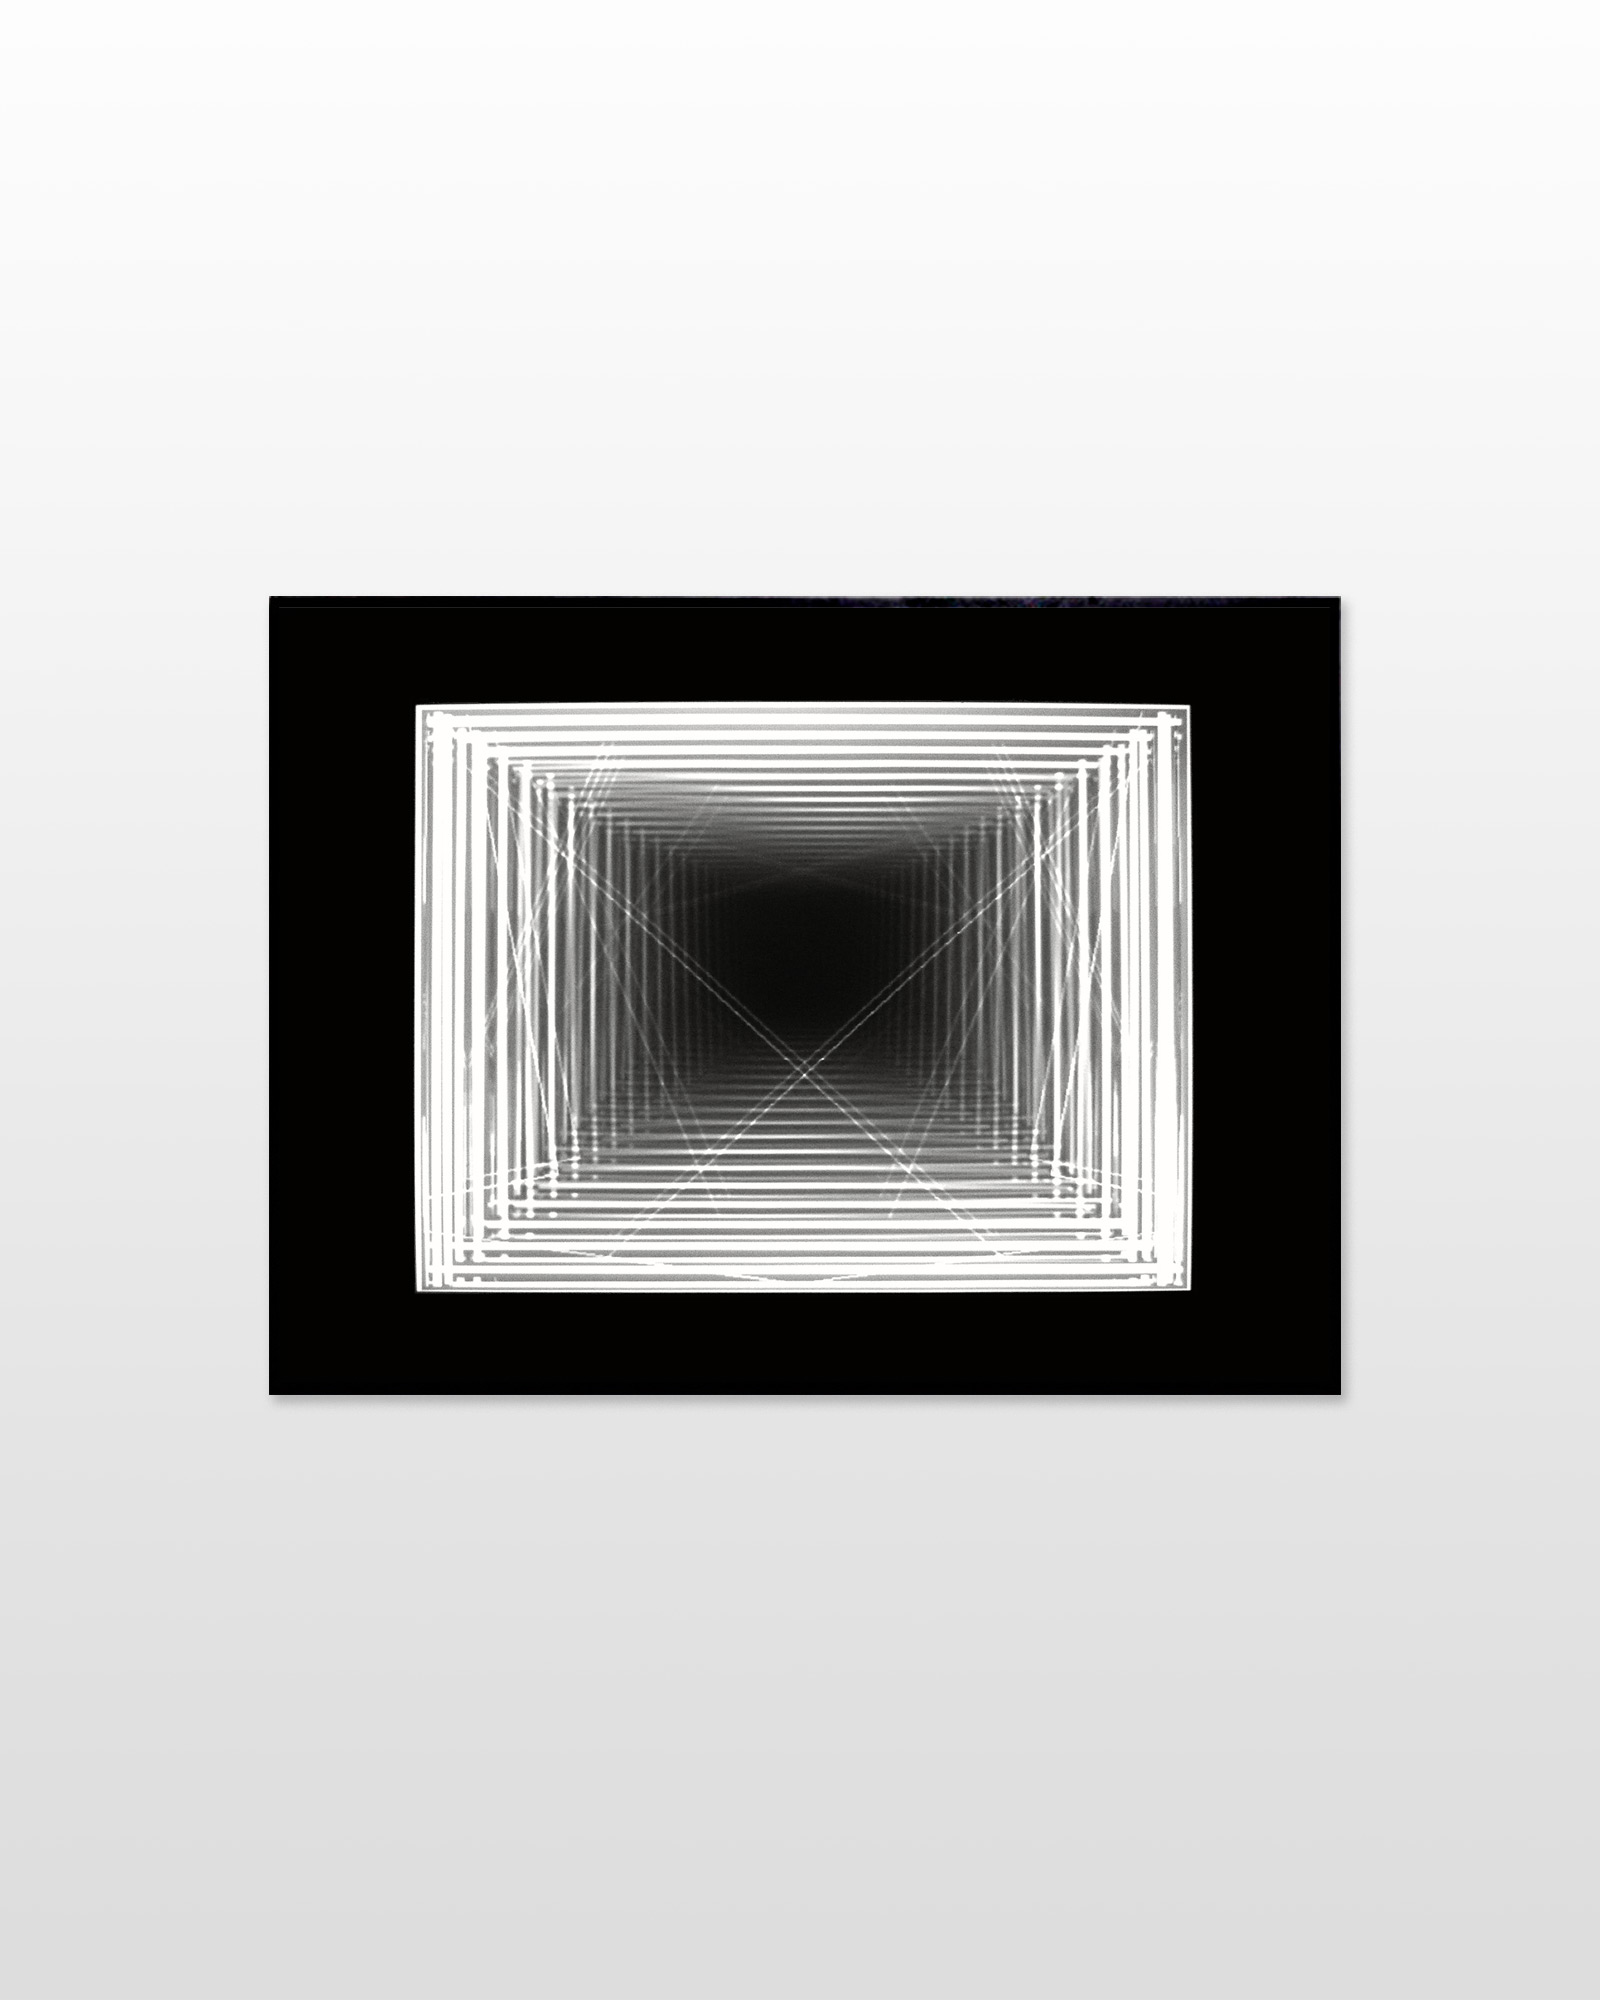 posters-prints, photographs, giclee-print, new-media, abstract, geometric, minimalistic, monochrome, movement, patterns, science, technology, black, grey, white, ink, paper, abstract-forms, beautiful, black-and-white, computer, cubes, cubism, danish, dark, decorative, design, digital, horizontal, interior, interior-design, male, modern, nordic, pixel, scandinavien, Buy original high quality art. Paintings, drawings, limited edition prints & posters by talented artists.